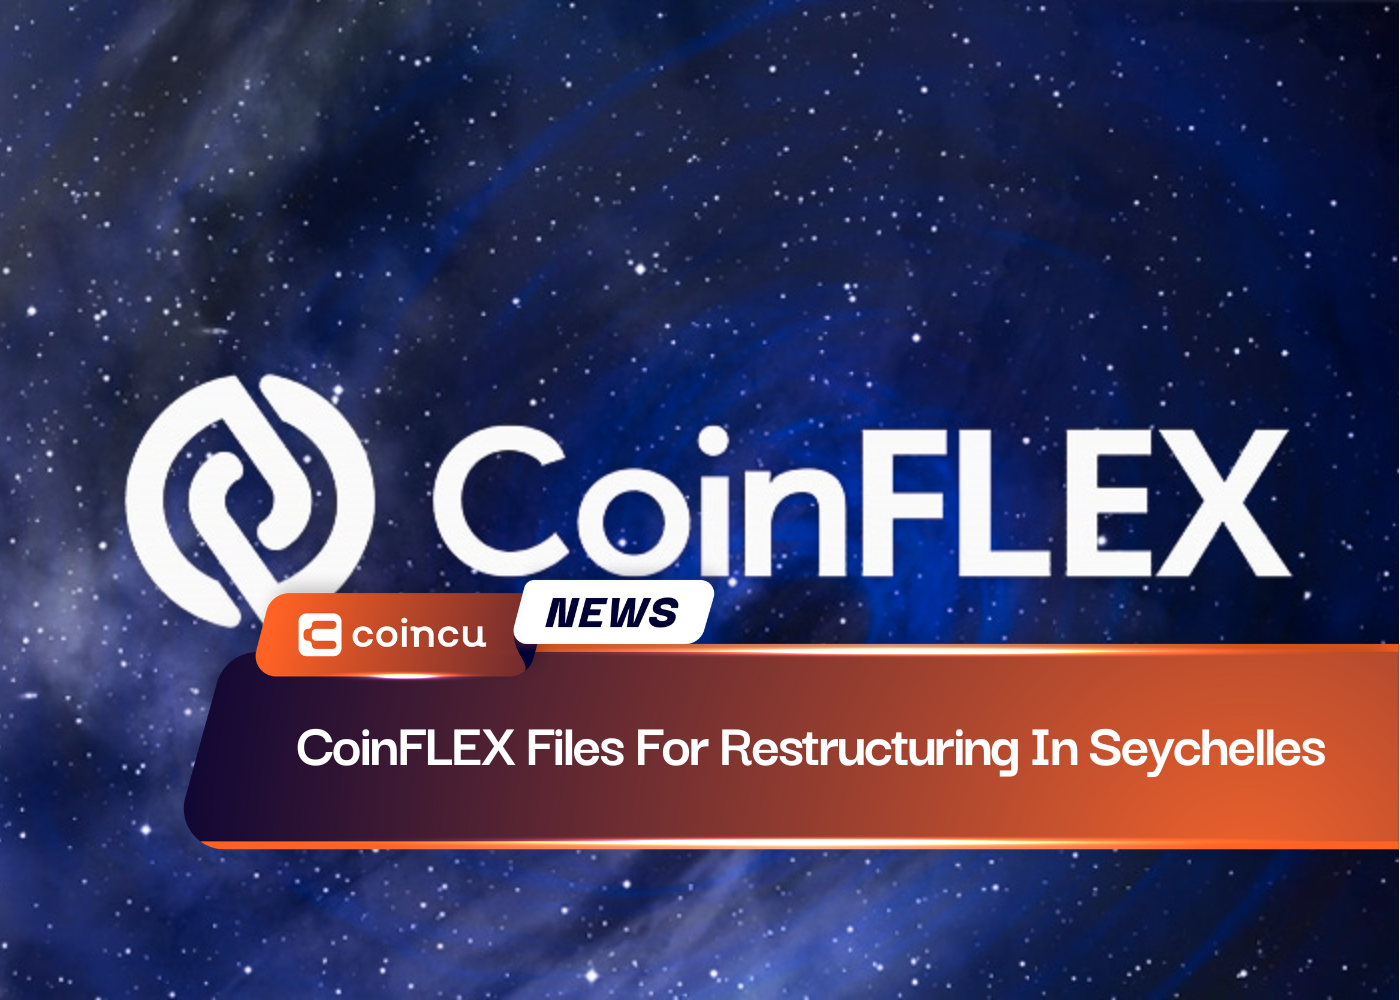 CoinFLEX Files For Restructuring In Seychelles